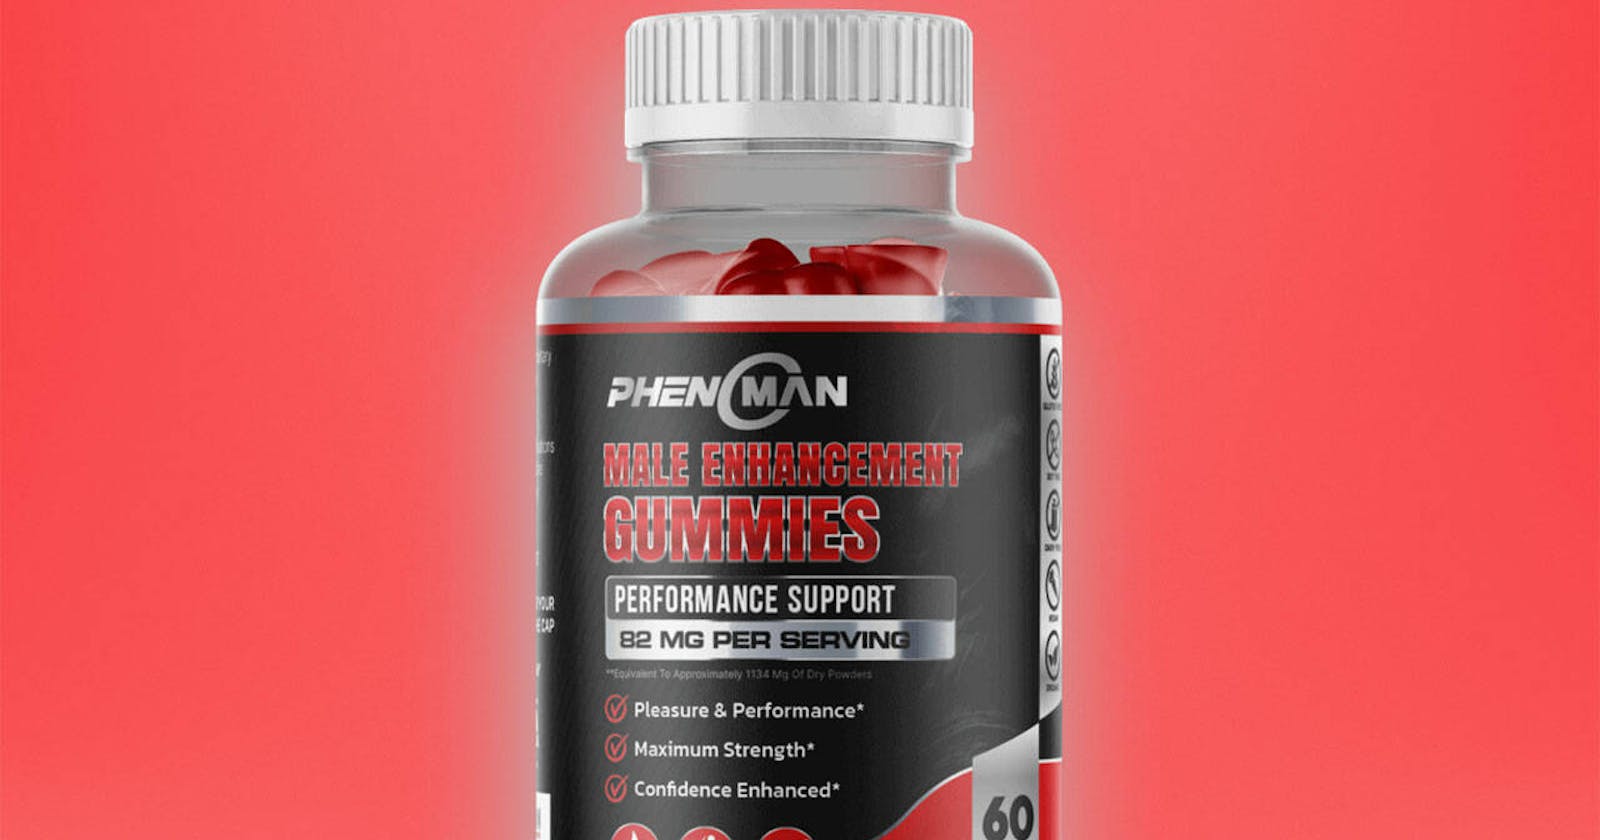 What The Pentagon Can Teach You About Phenoman Male Enhancement Gummies